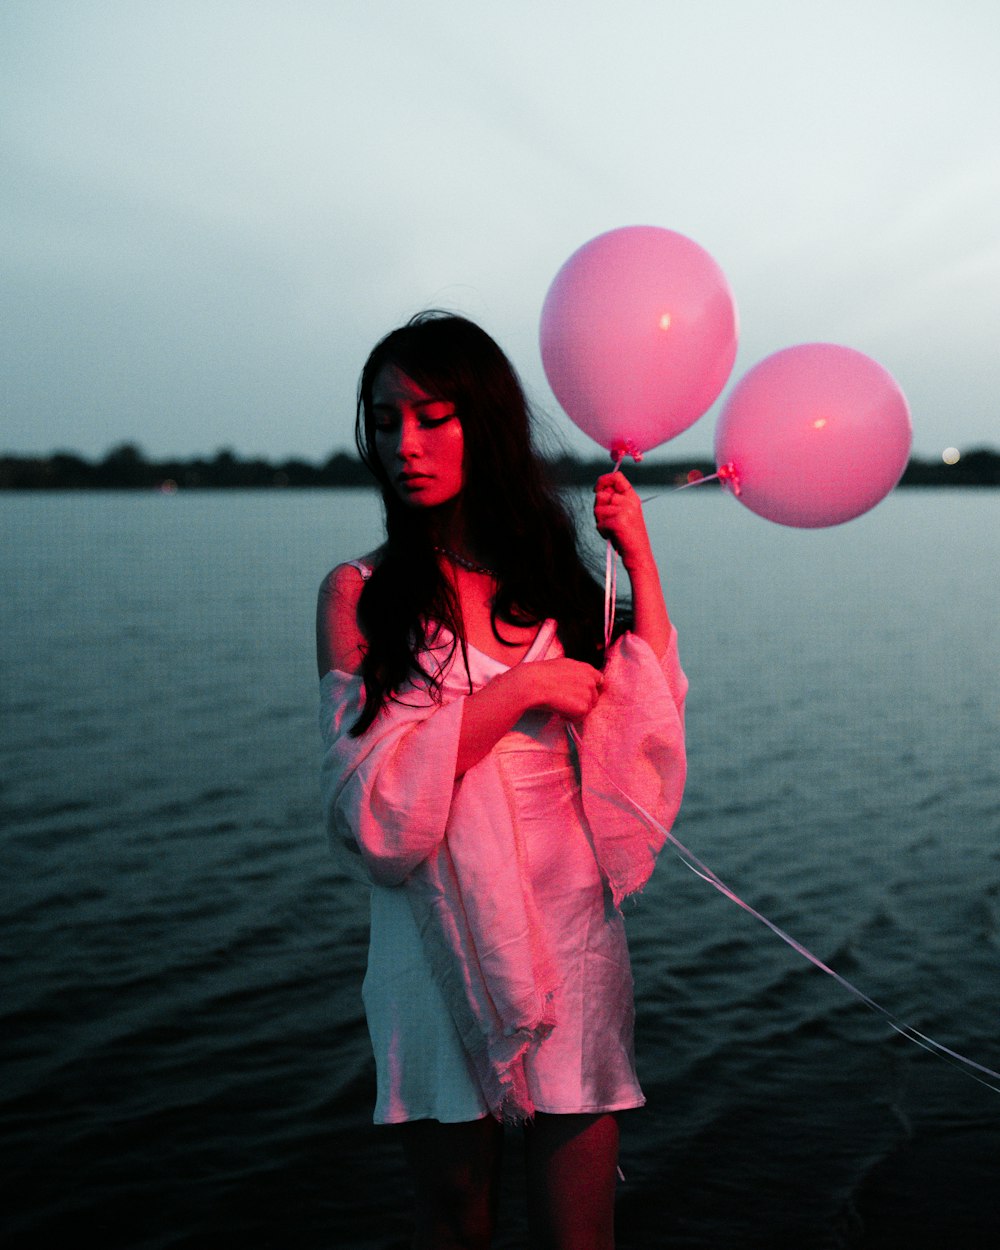 a woman in a white dress holding three pink balloons